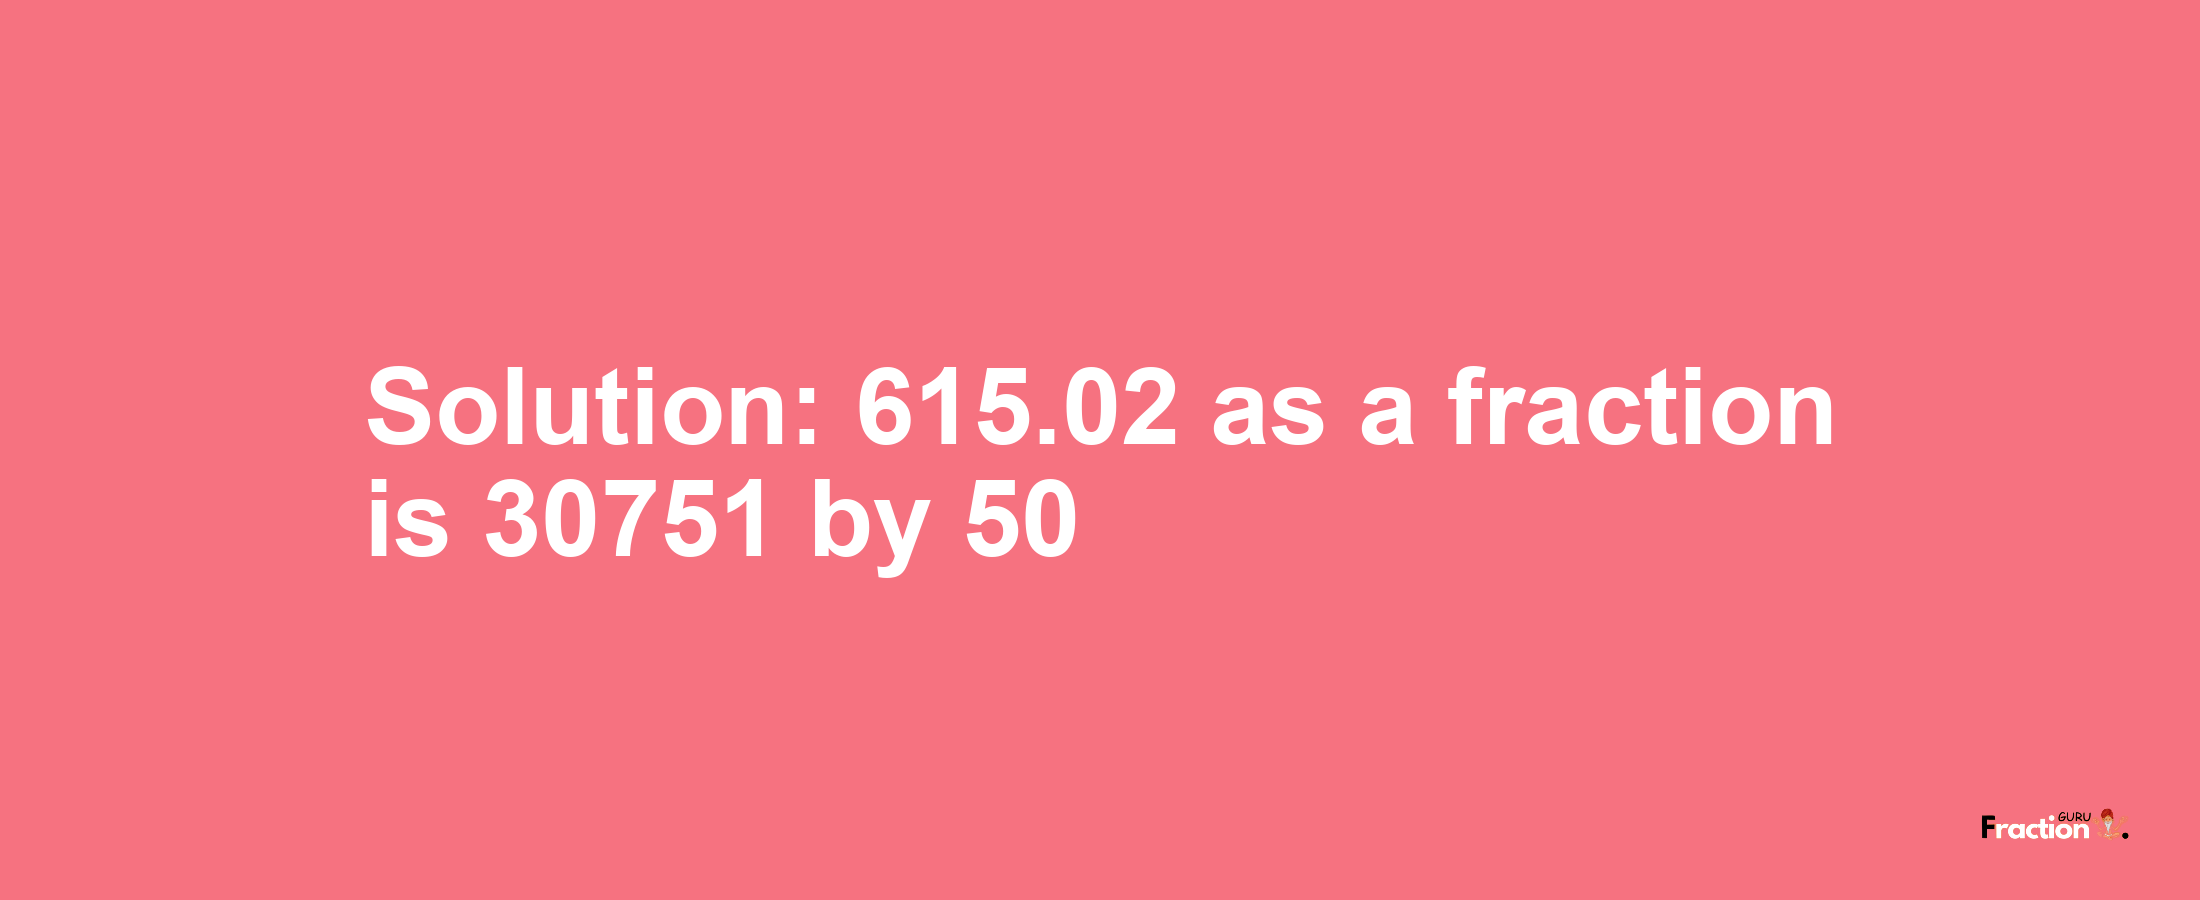 Solution:615.02 as a fraction is 30751/50